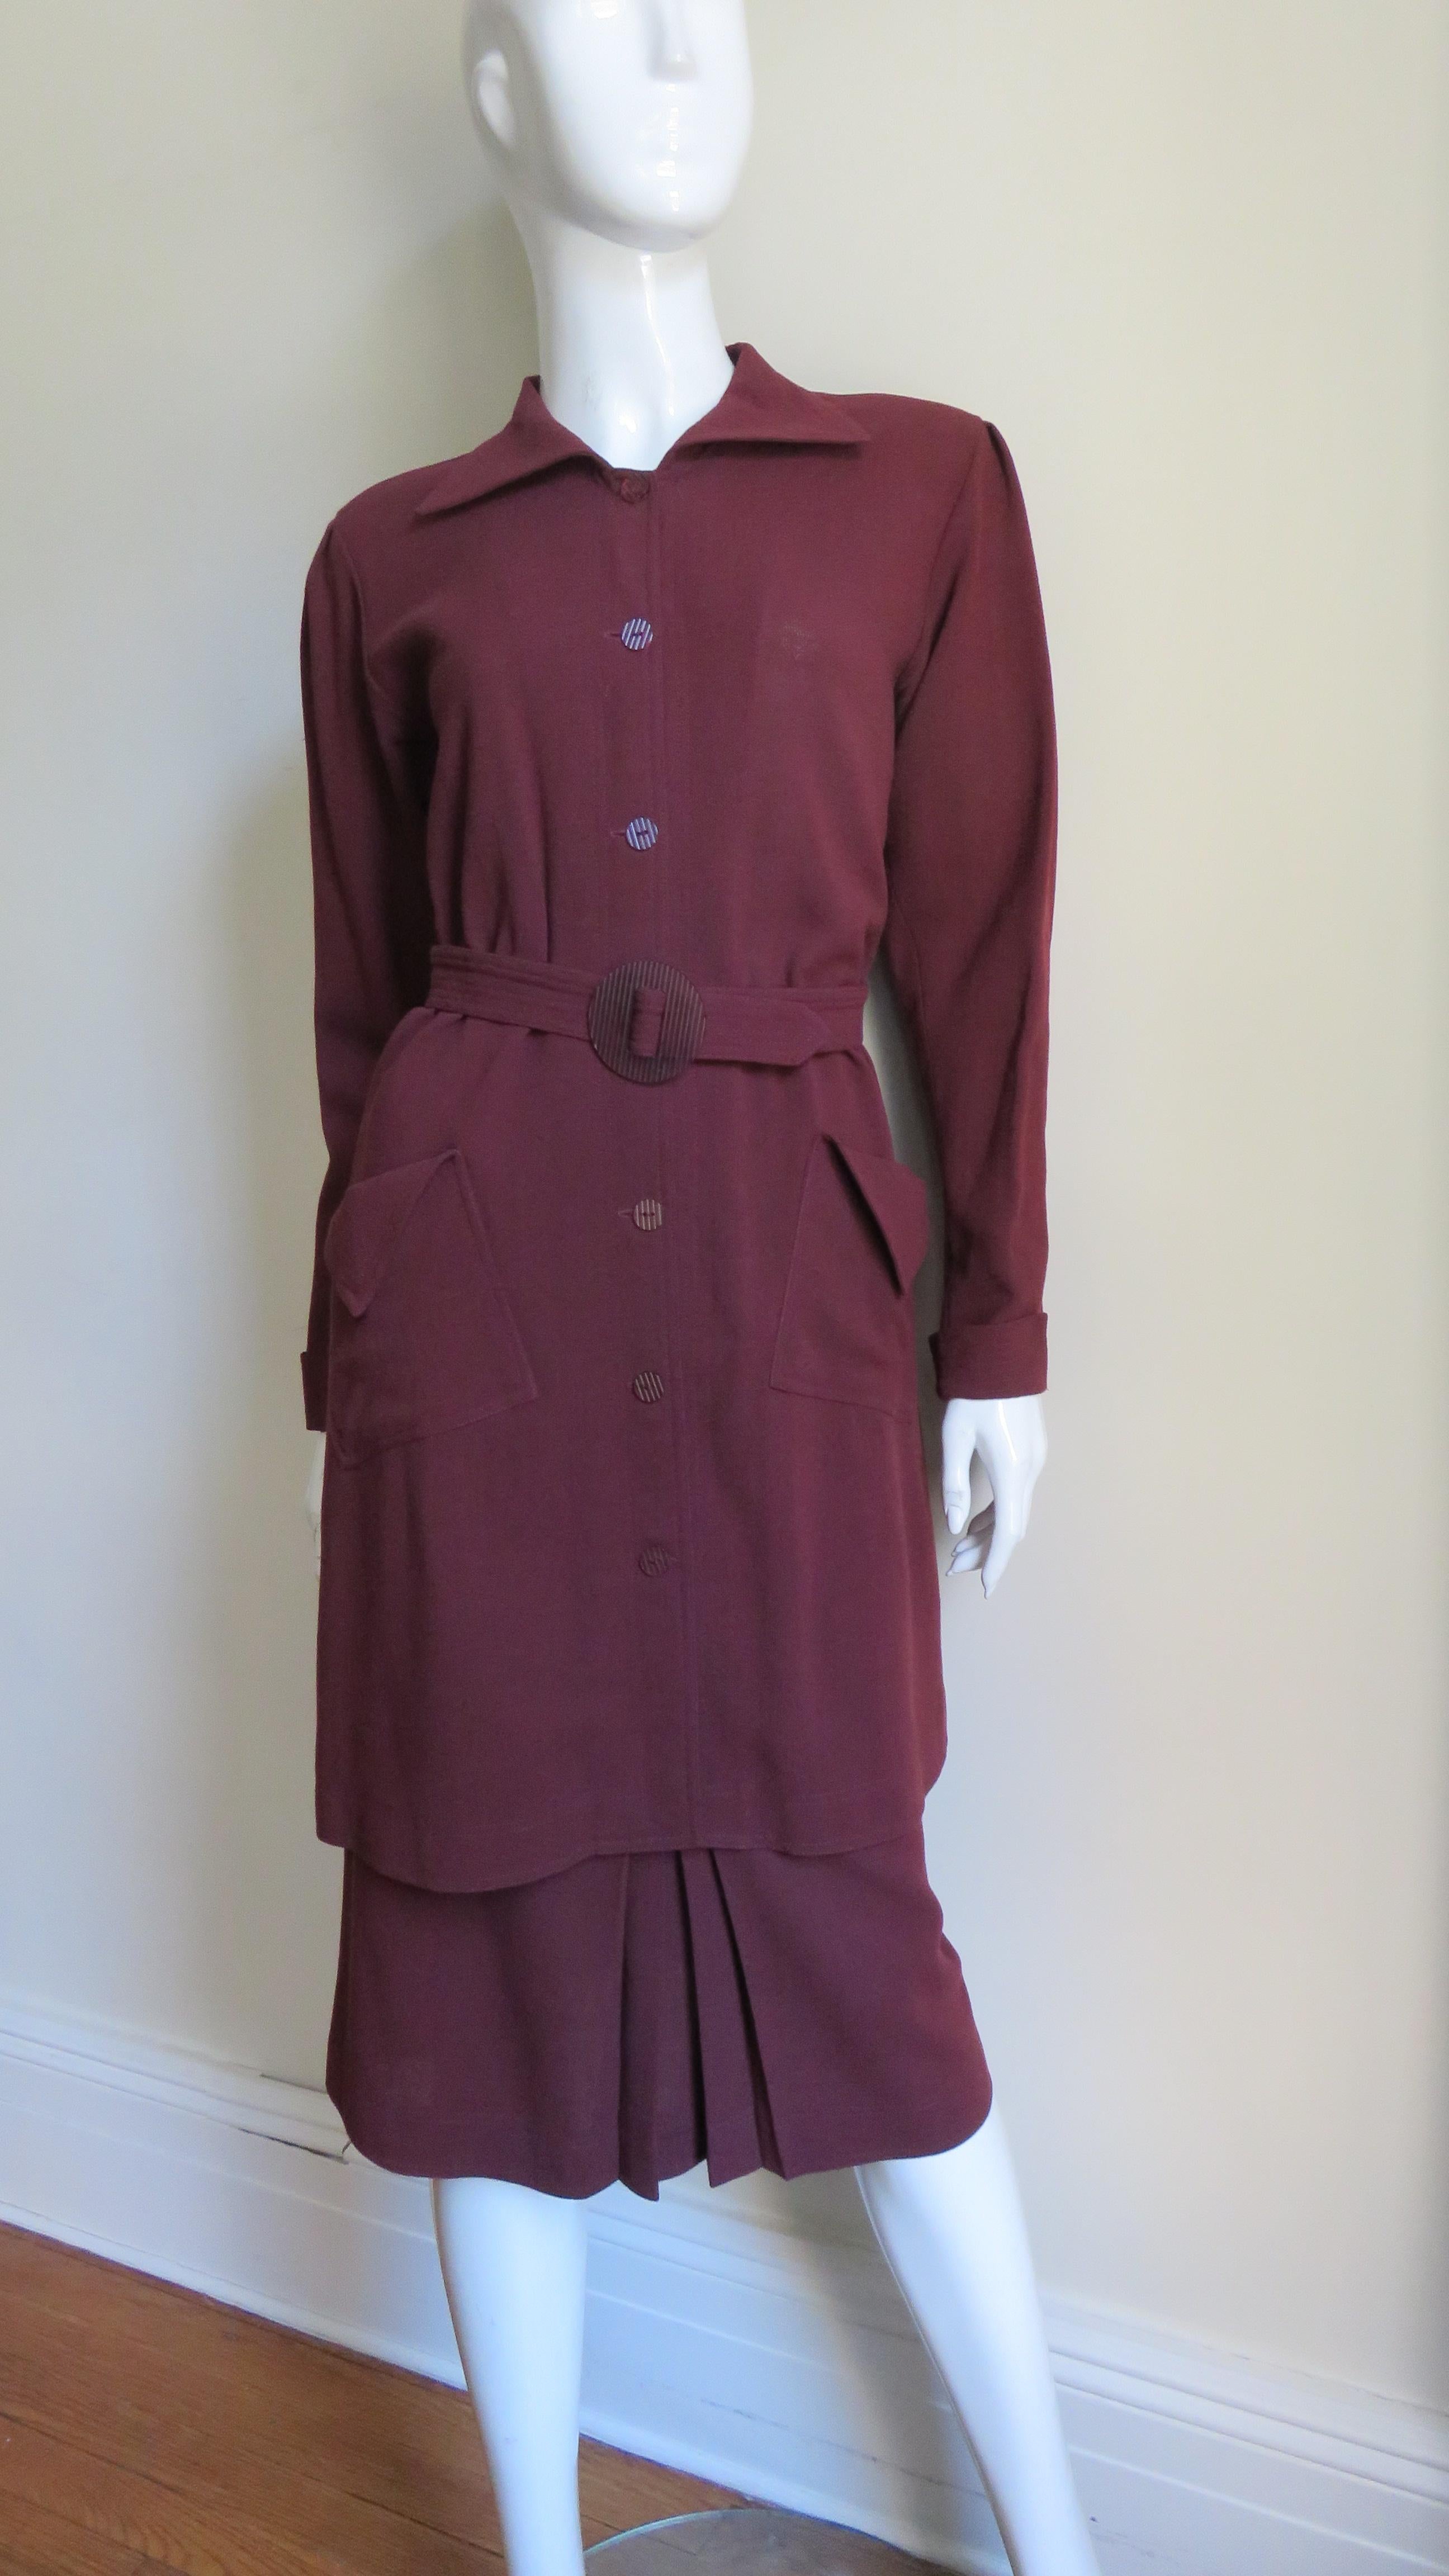 A great burgundy colored wool skirt suit by Jean Muir.  The jacket has long sleeves with folded back cuffs, tucks at the tops of the shoulders with slight padding and a shirt collar.  It is lower thigh length with 2 front flap pockets, matching